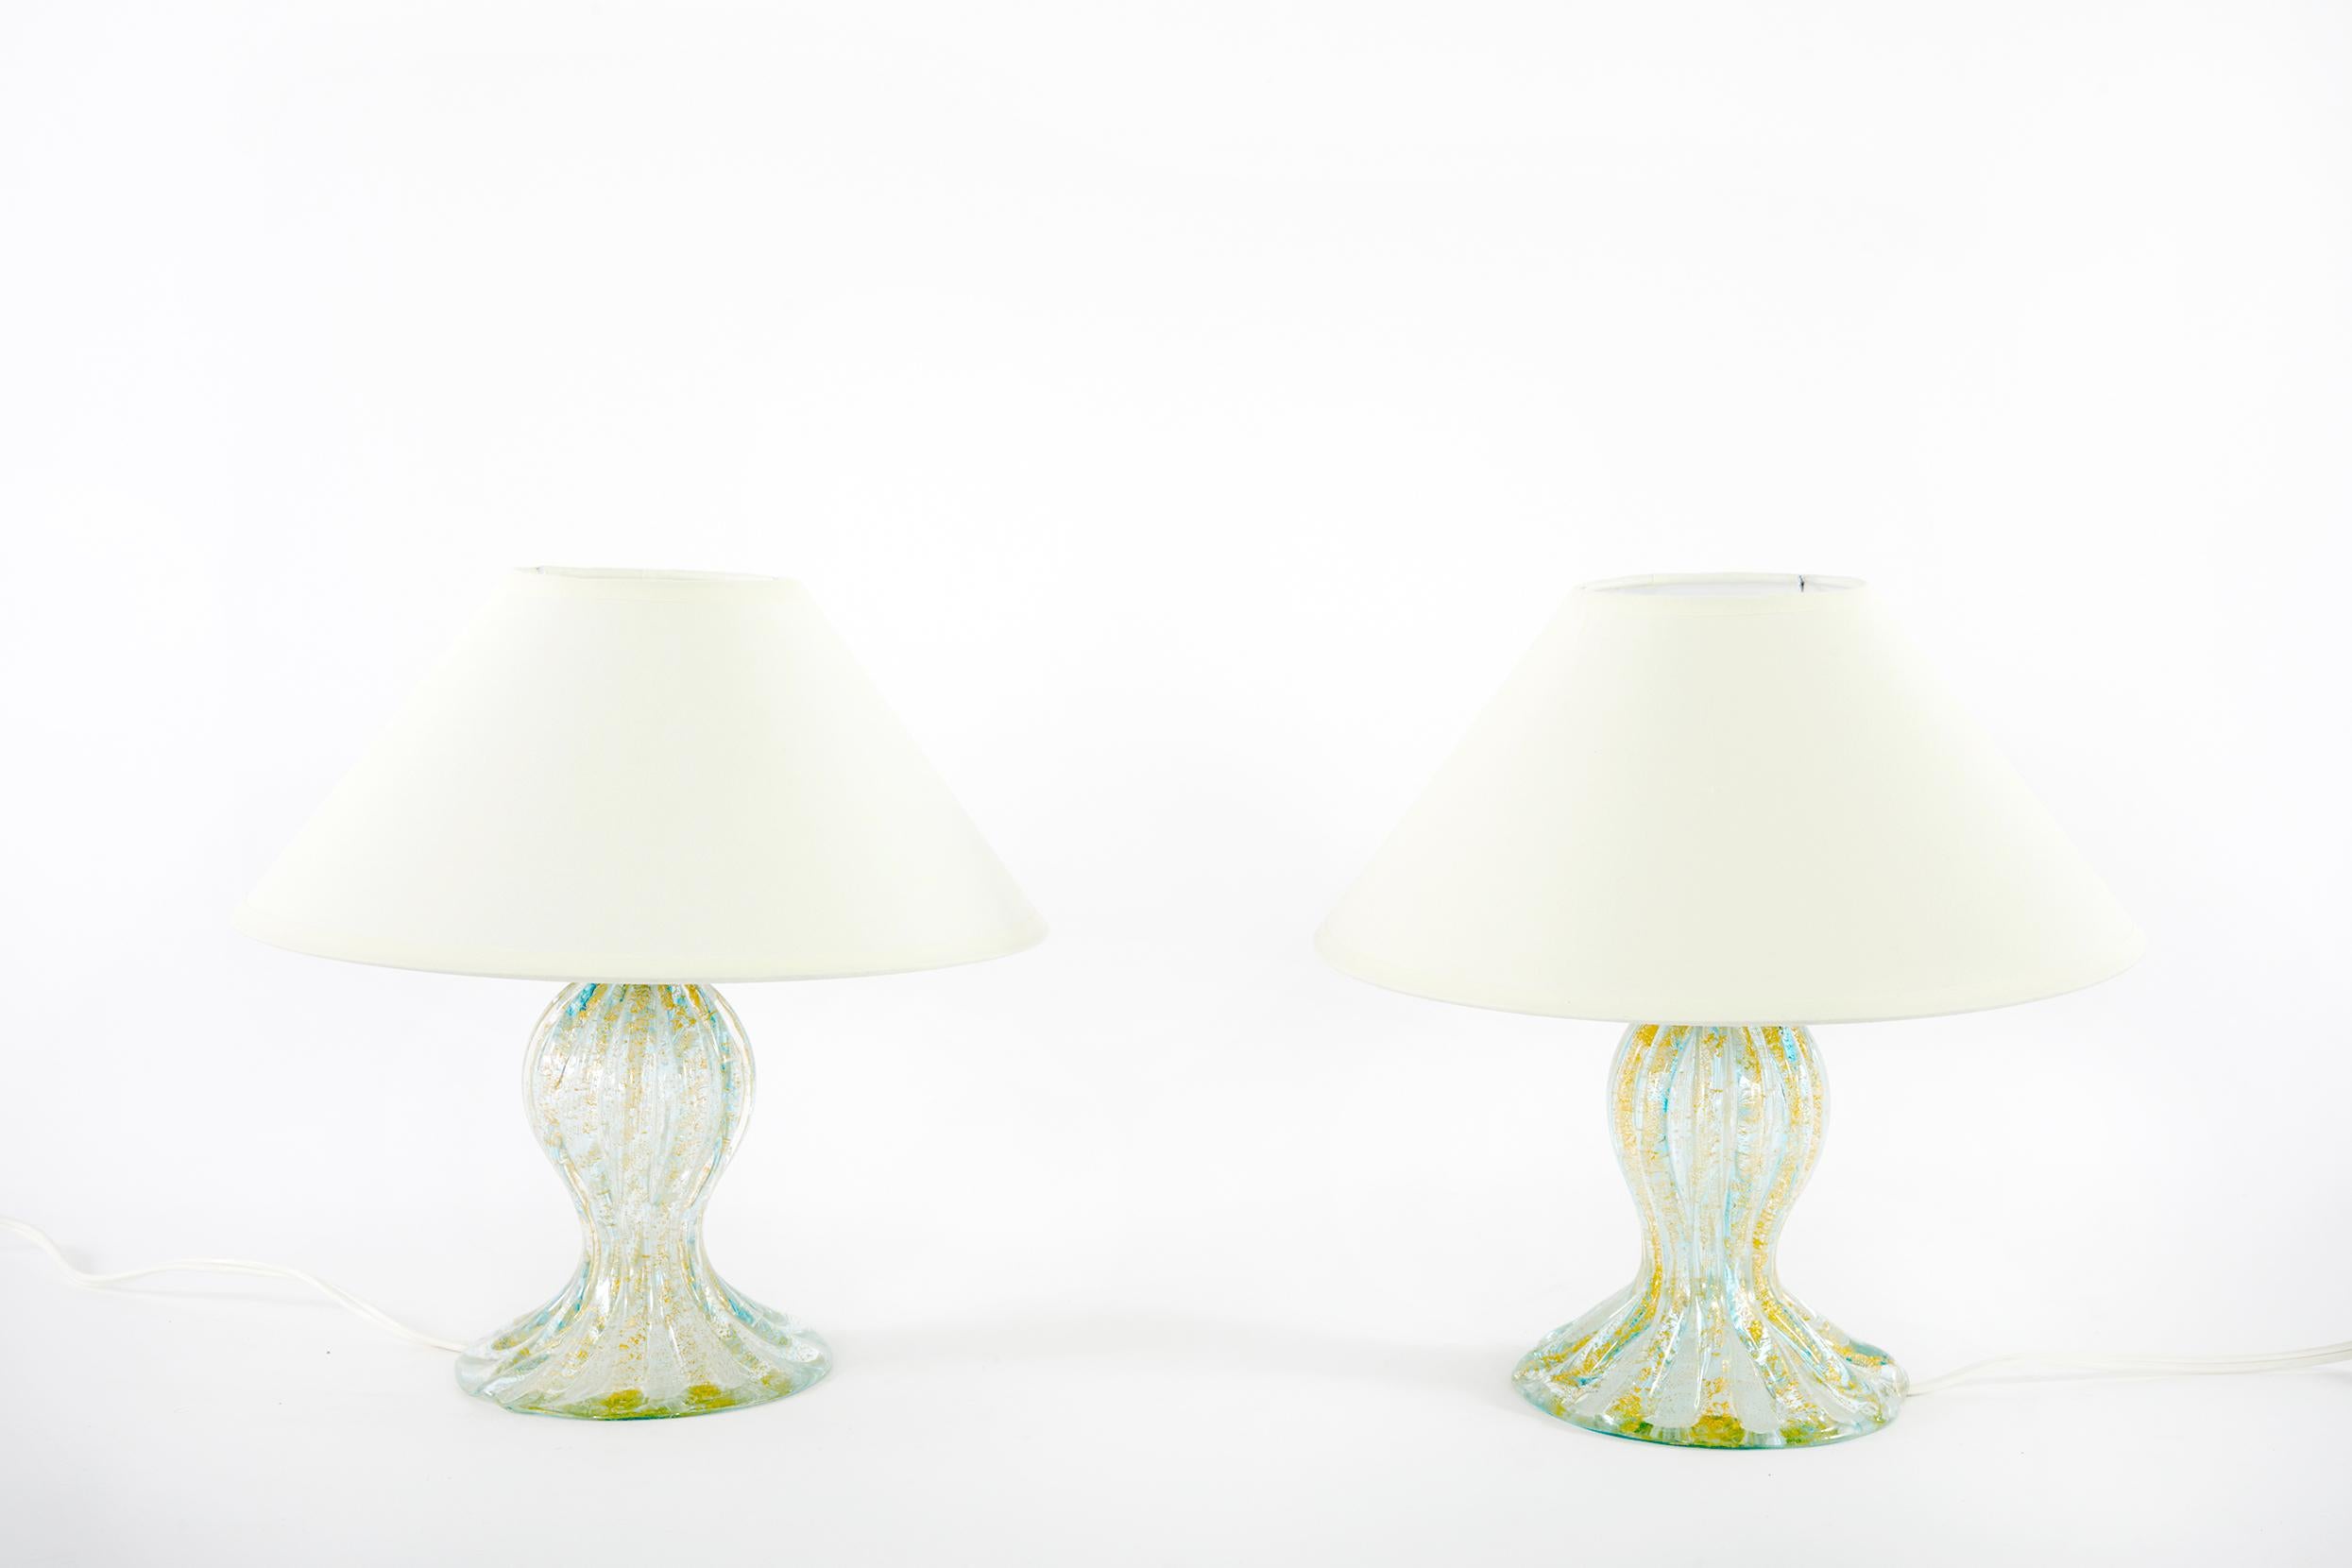 Very small late 20th century Murano glass with gold flecks design details pair table lamp with round bell shape linen exterior shade . Each lamp is in excellent working condition. Rewired for US use. From base to finial each lamp stands about 12